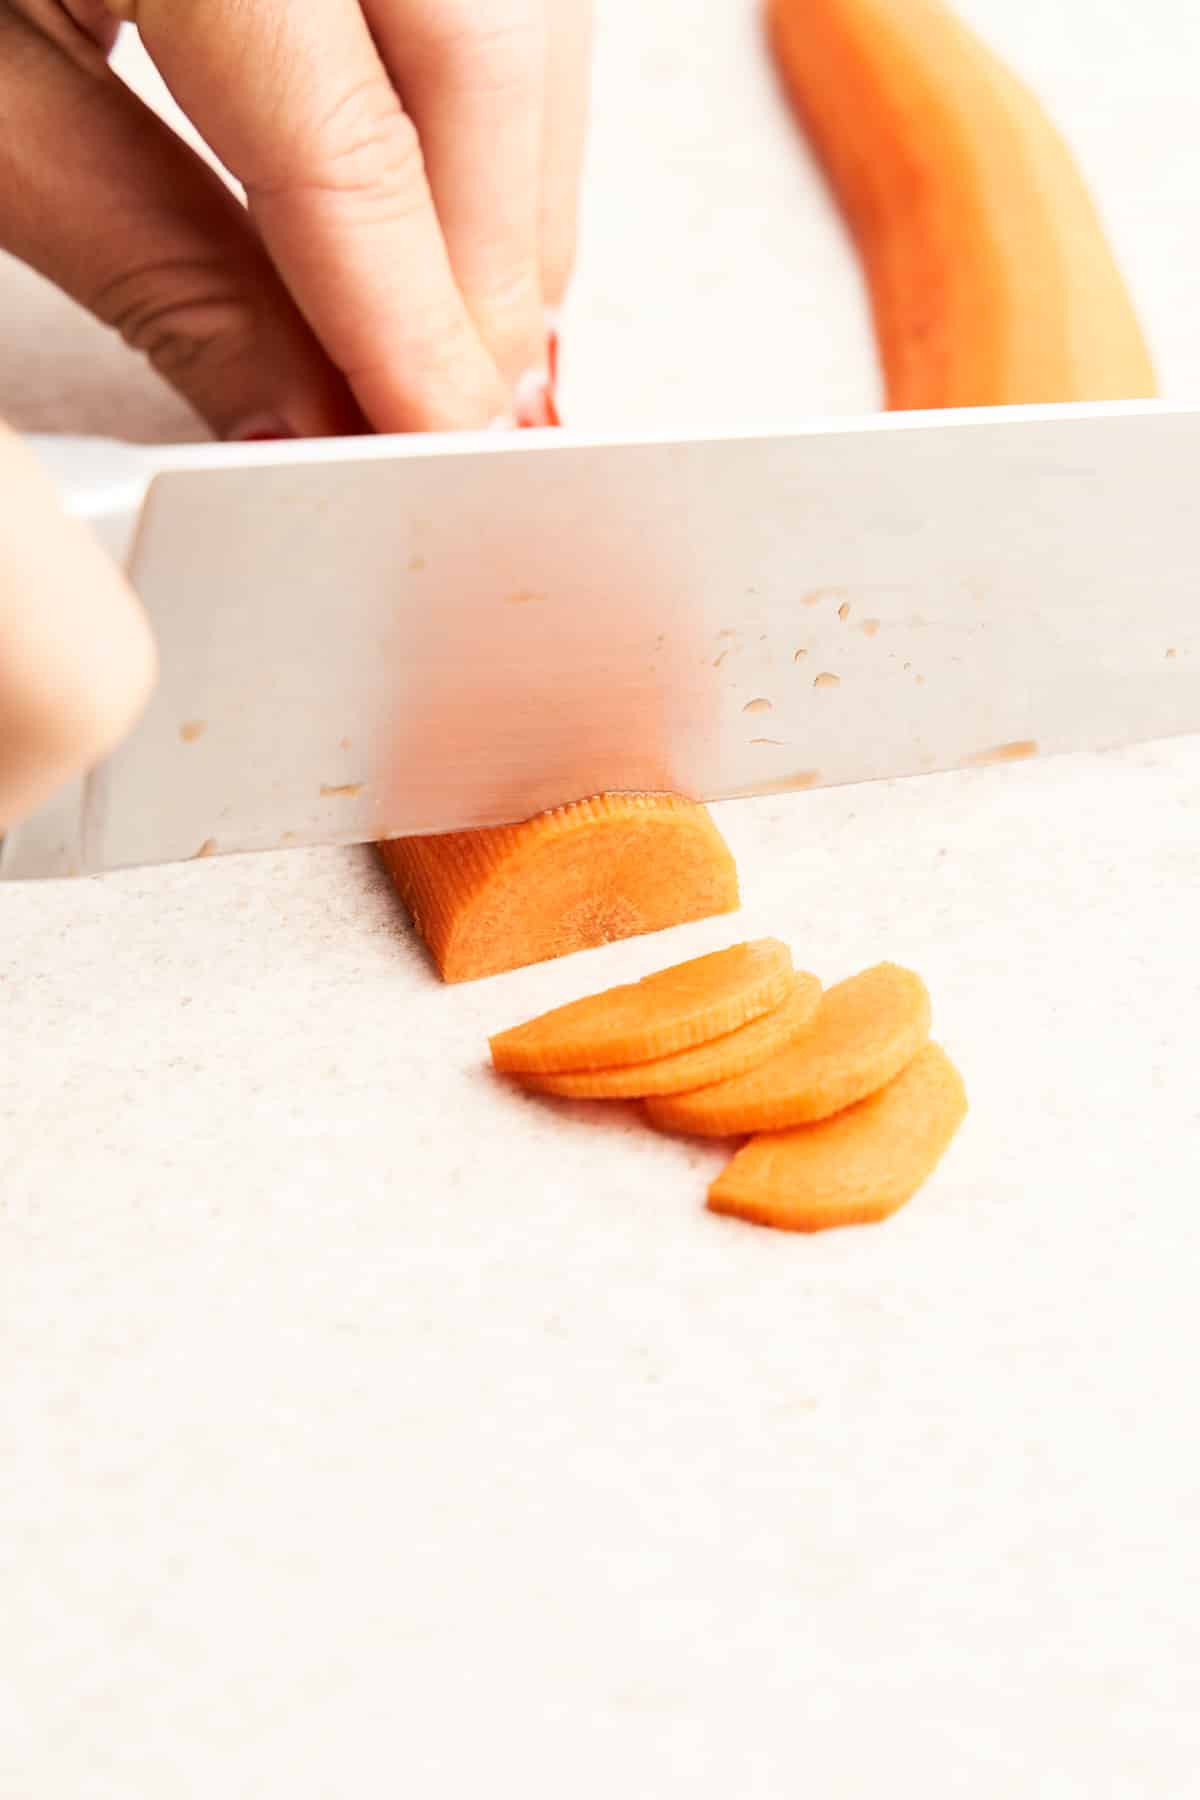 Cutting a carrot into half moons.